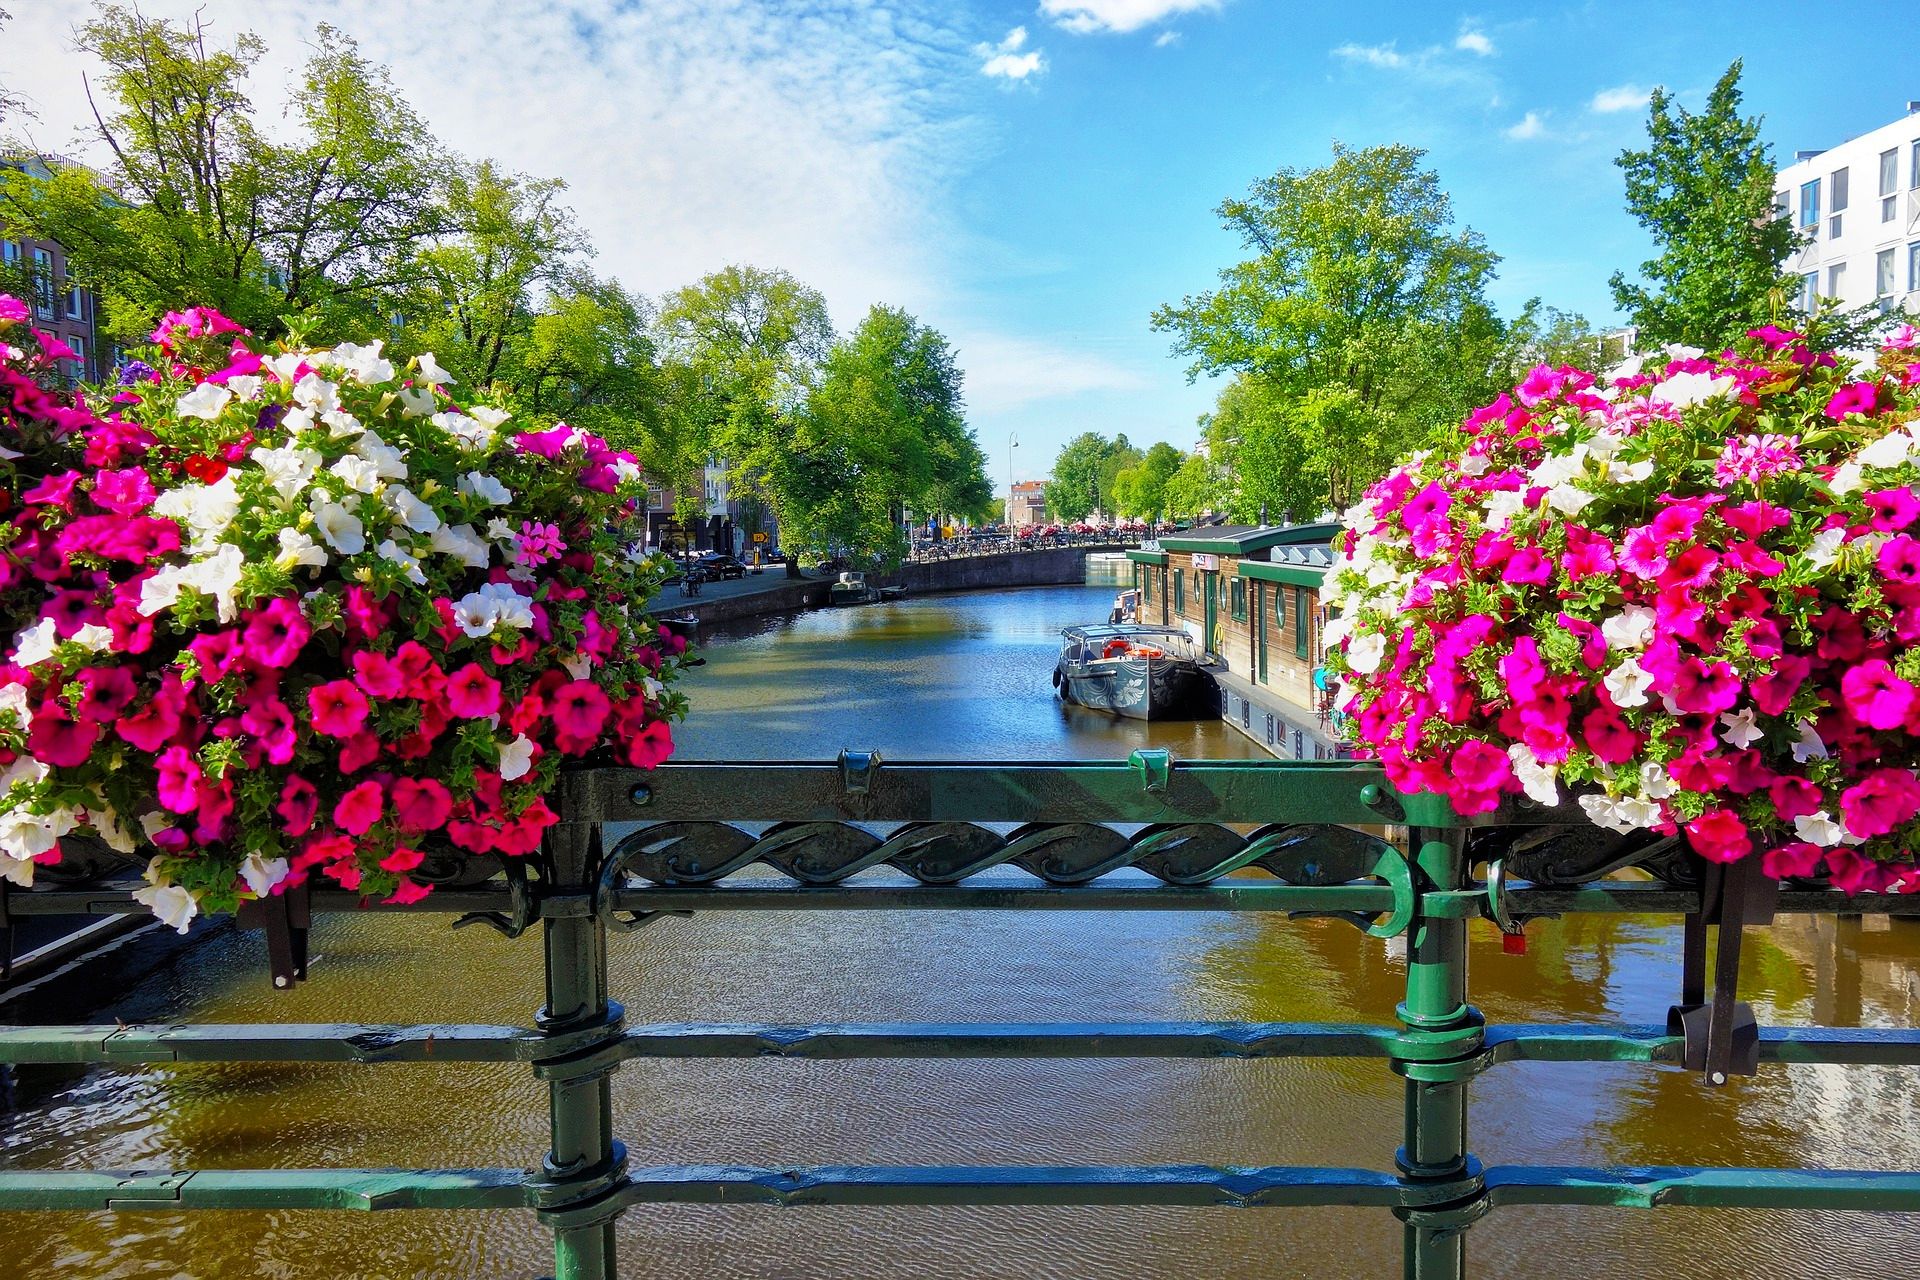 Visit Amsterdam in the spring